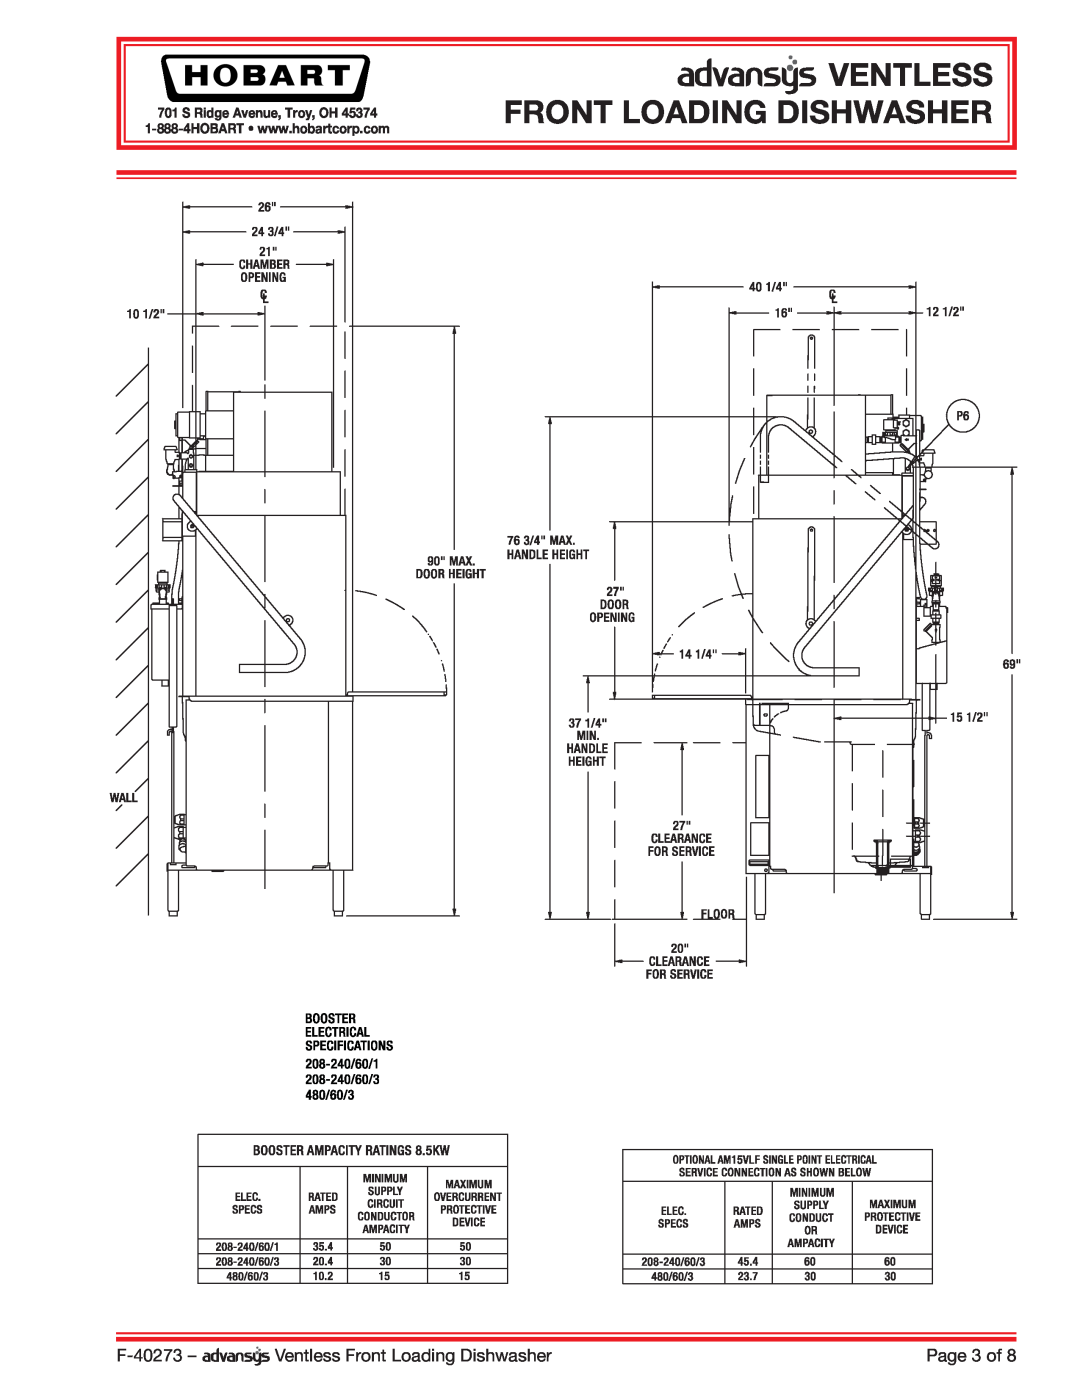 Hobart AM15VLF dimensions Ventless Front Loading Dishwasher, F-40273, Page 3 of, S Ridge Avenue, Troy, OH 